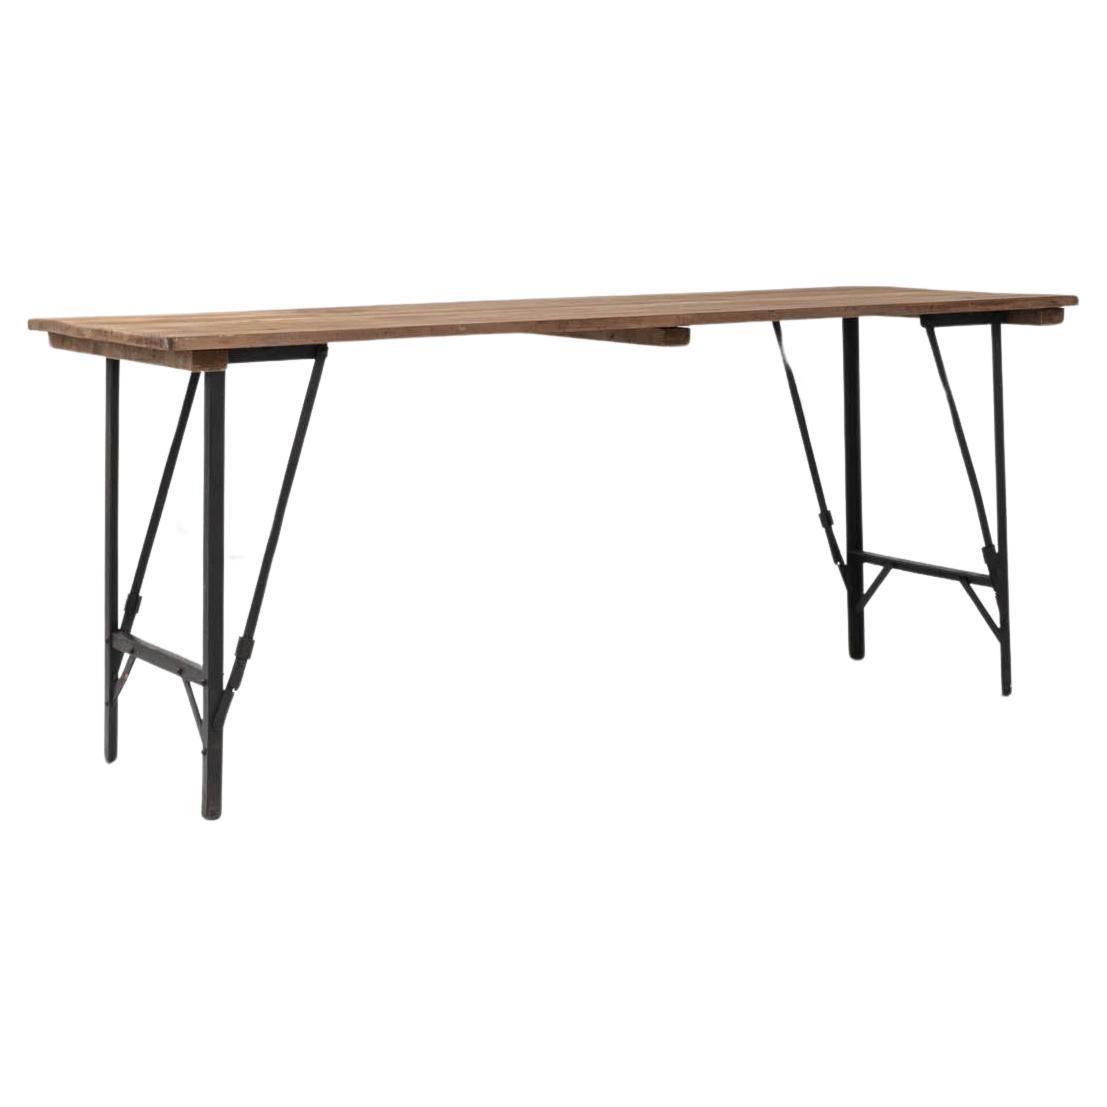 20th Century Belgian Metal Folding Table with Wooden Top